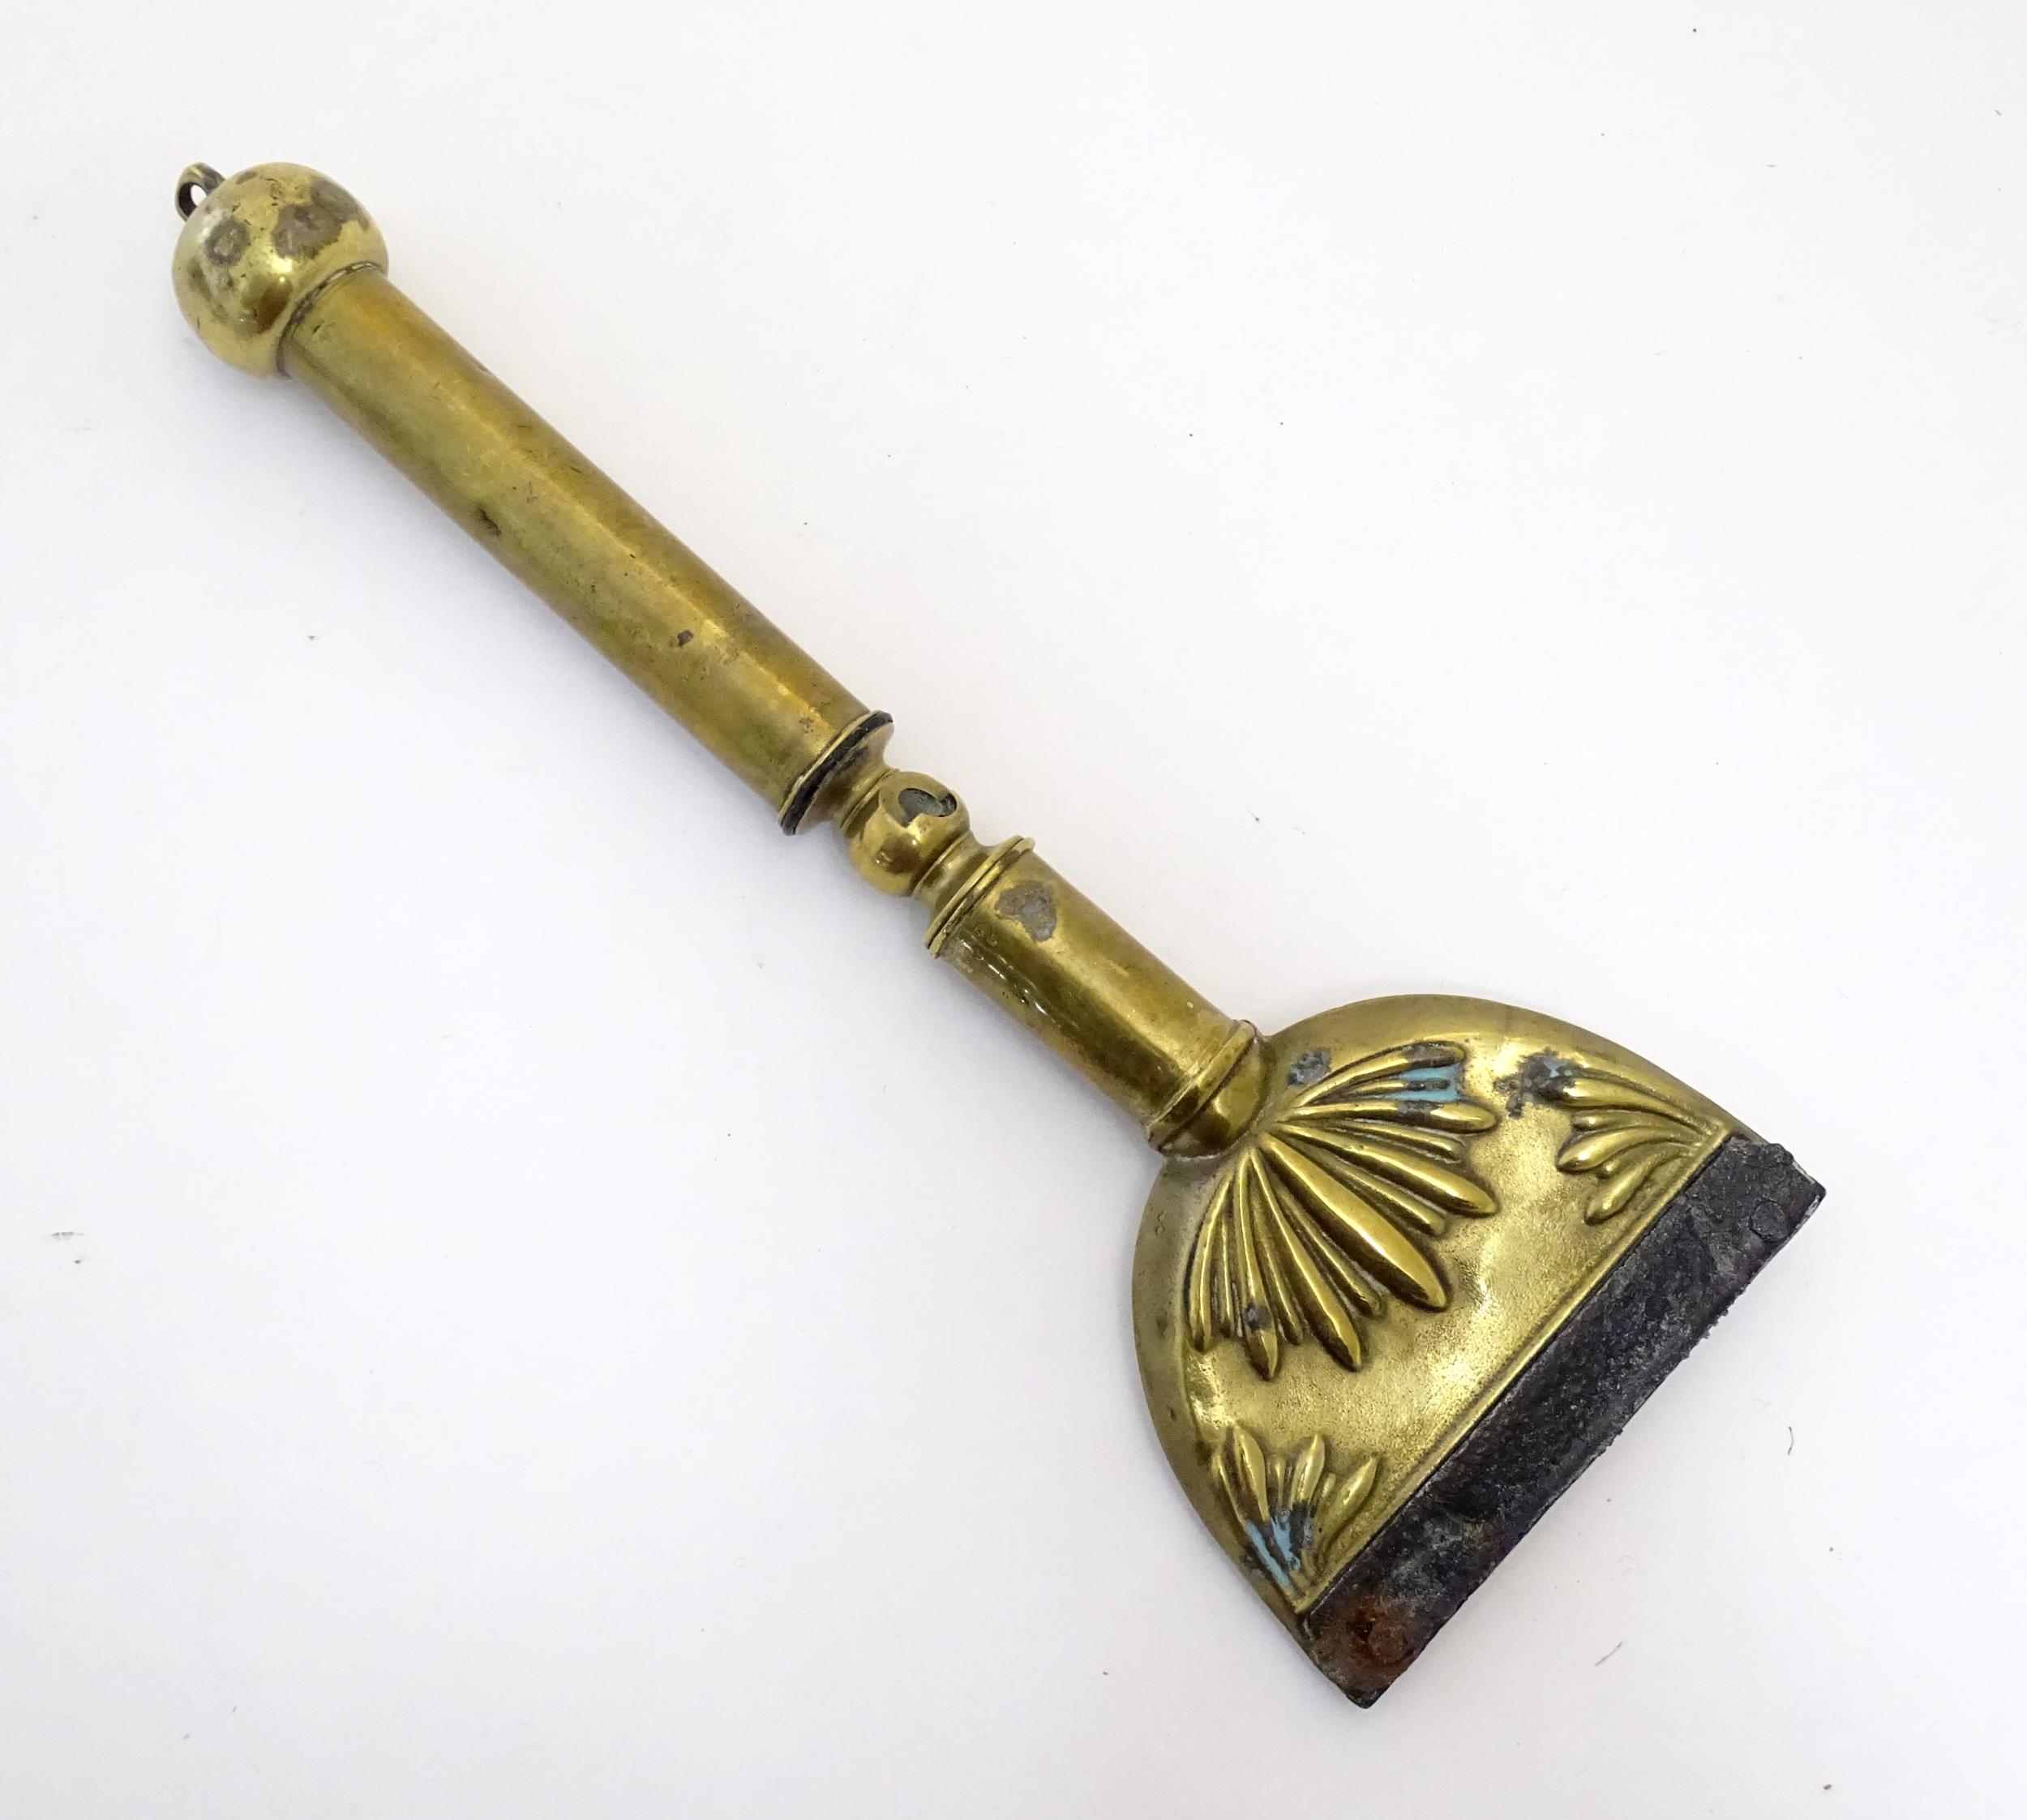 A 19thC brass horse hair singer / singeing lamp with embossed shell detail. Approx. 13 3/4" long